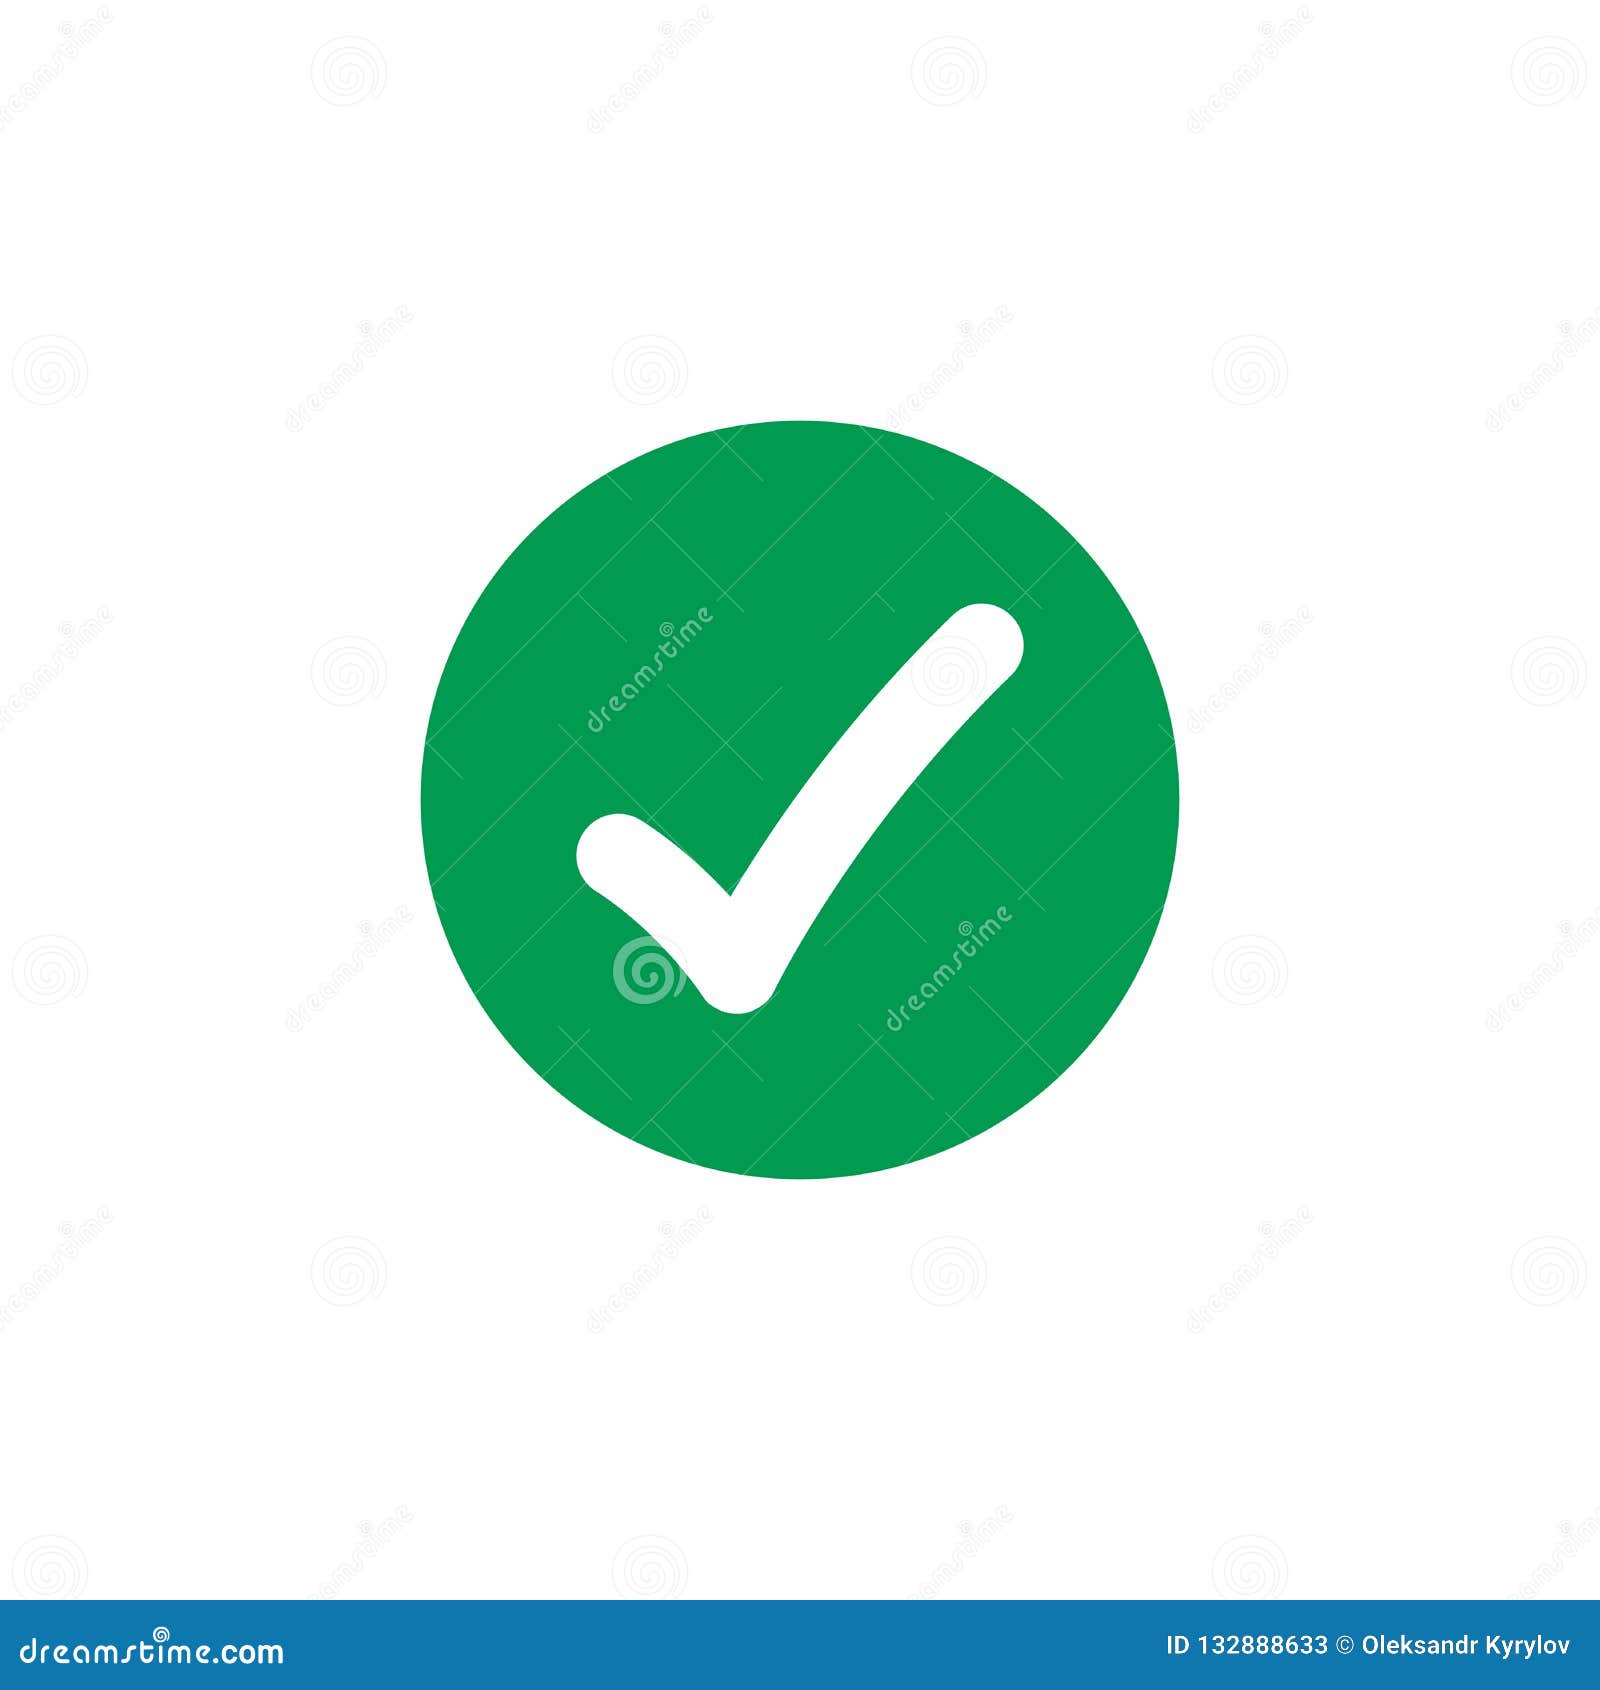 Check Tick Mark in Green Circle. Vector Illustration Isolated on White ...